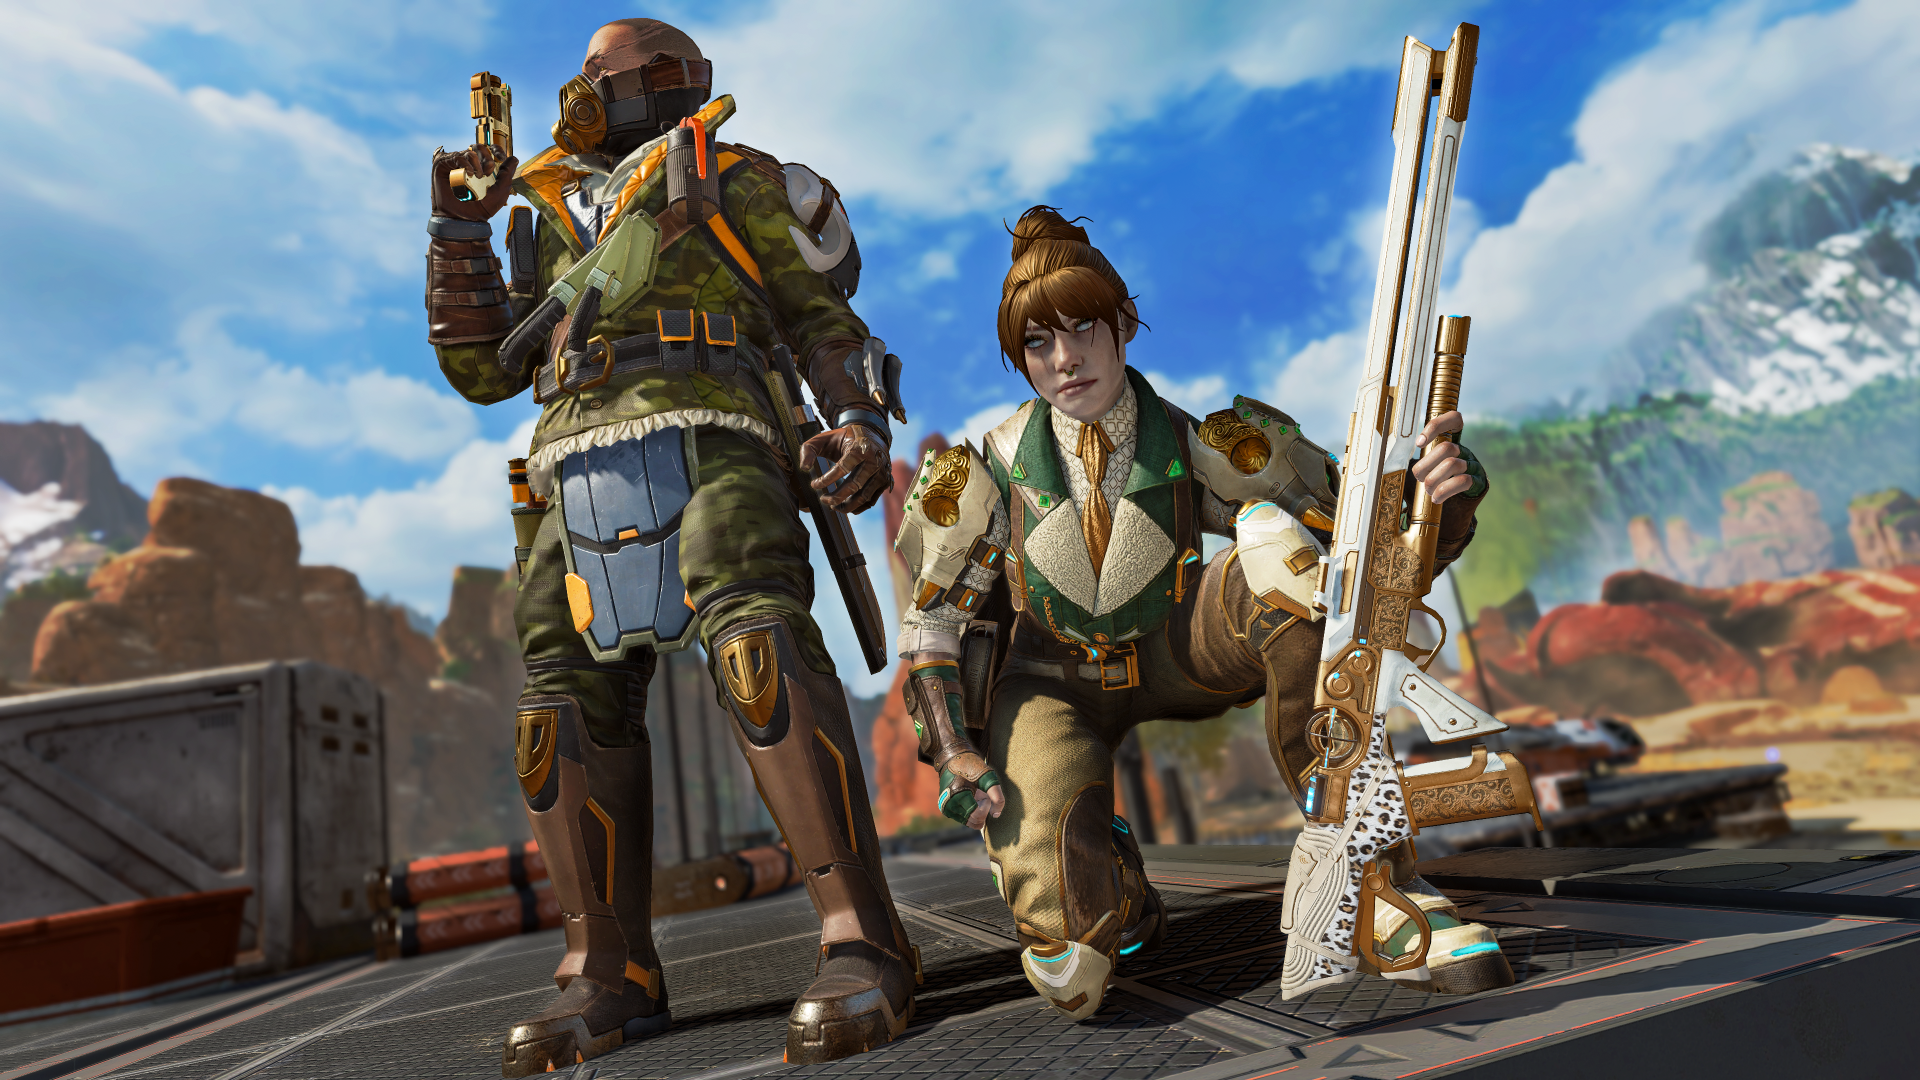 Apex Legends cross-progression and gifting are in the works at Respawn